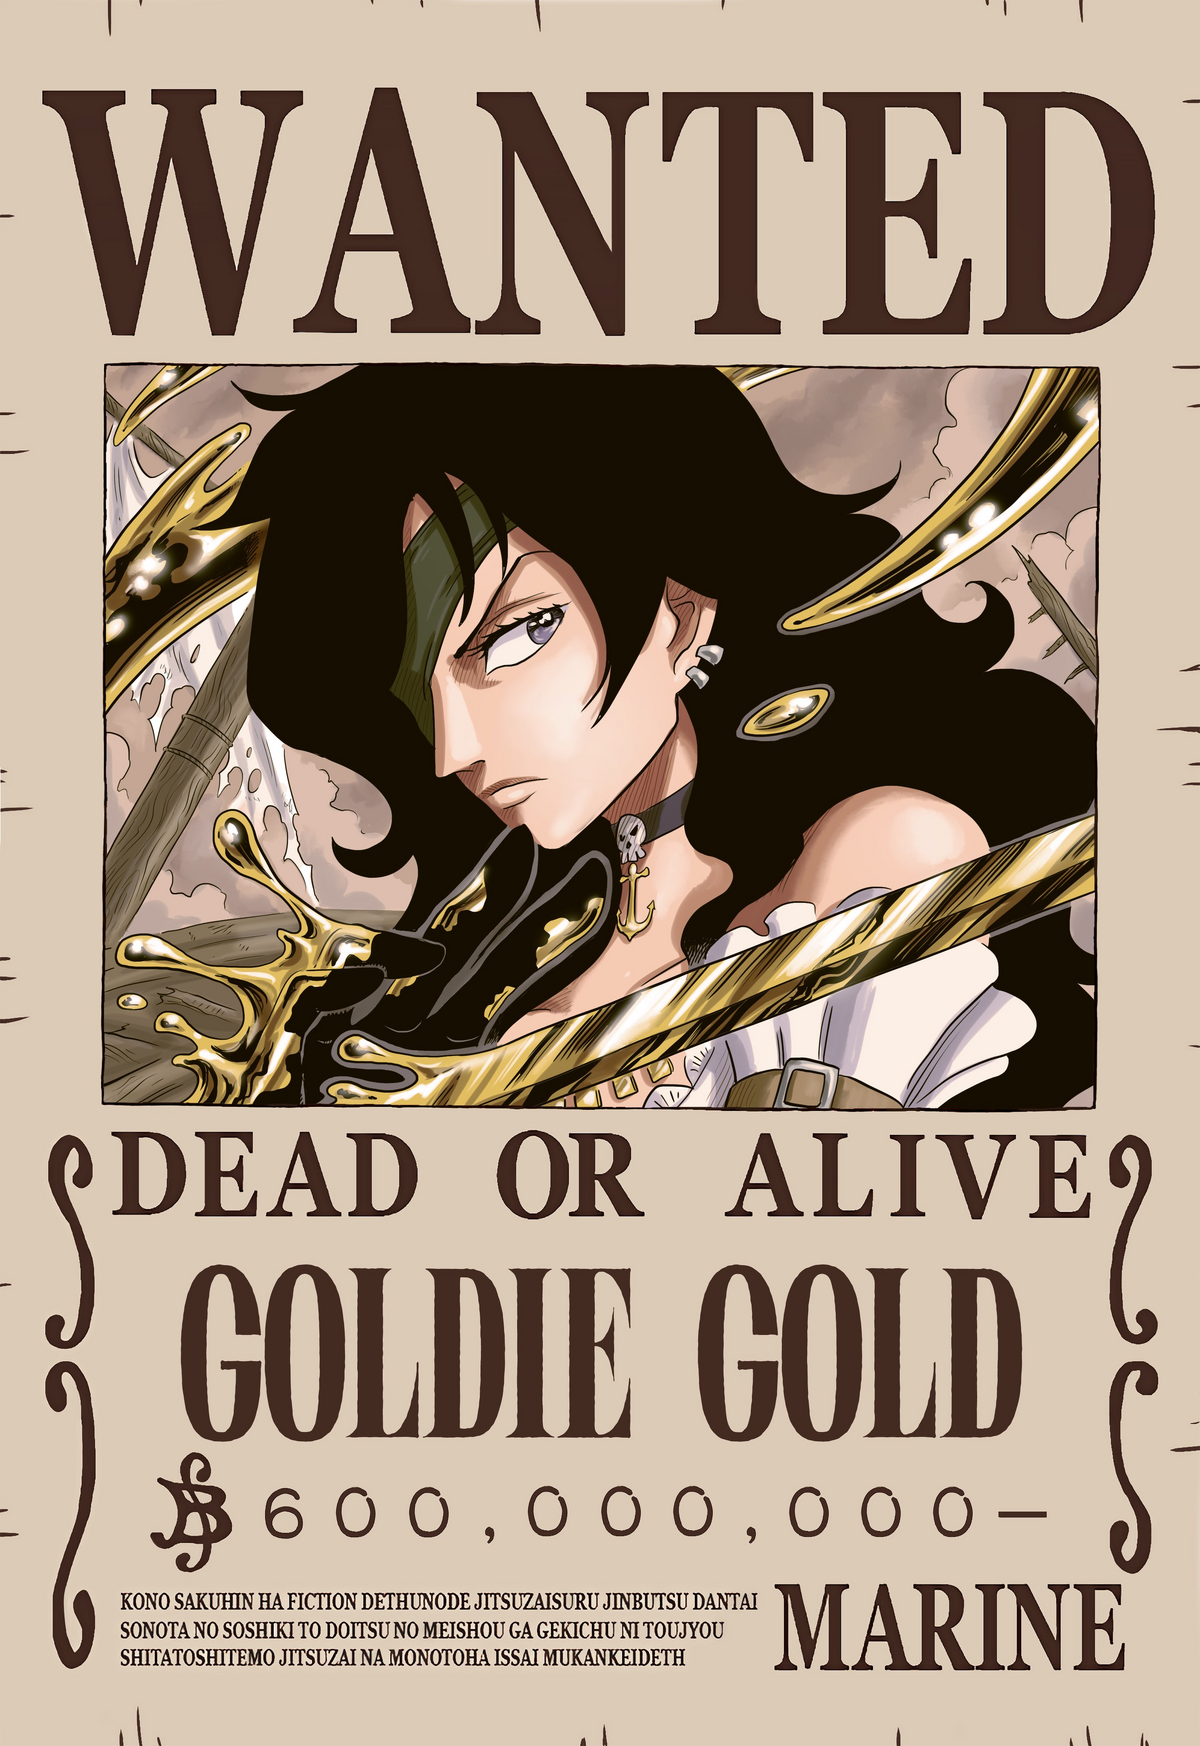 Goldie Gold/Gallery, One Piece Role-Play Wiki